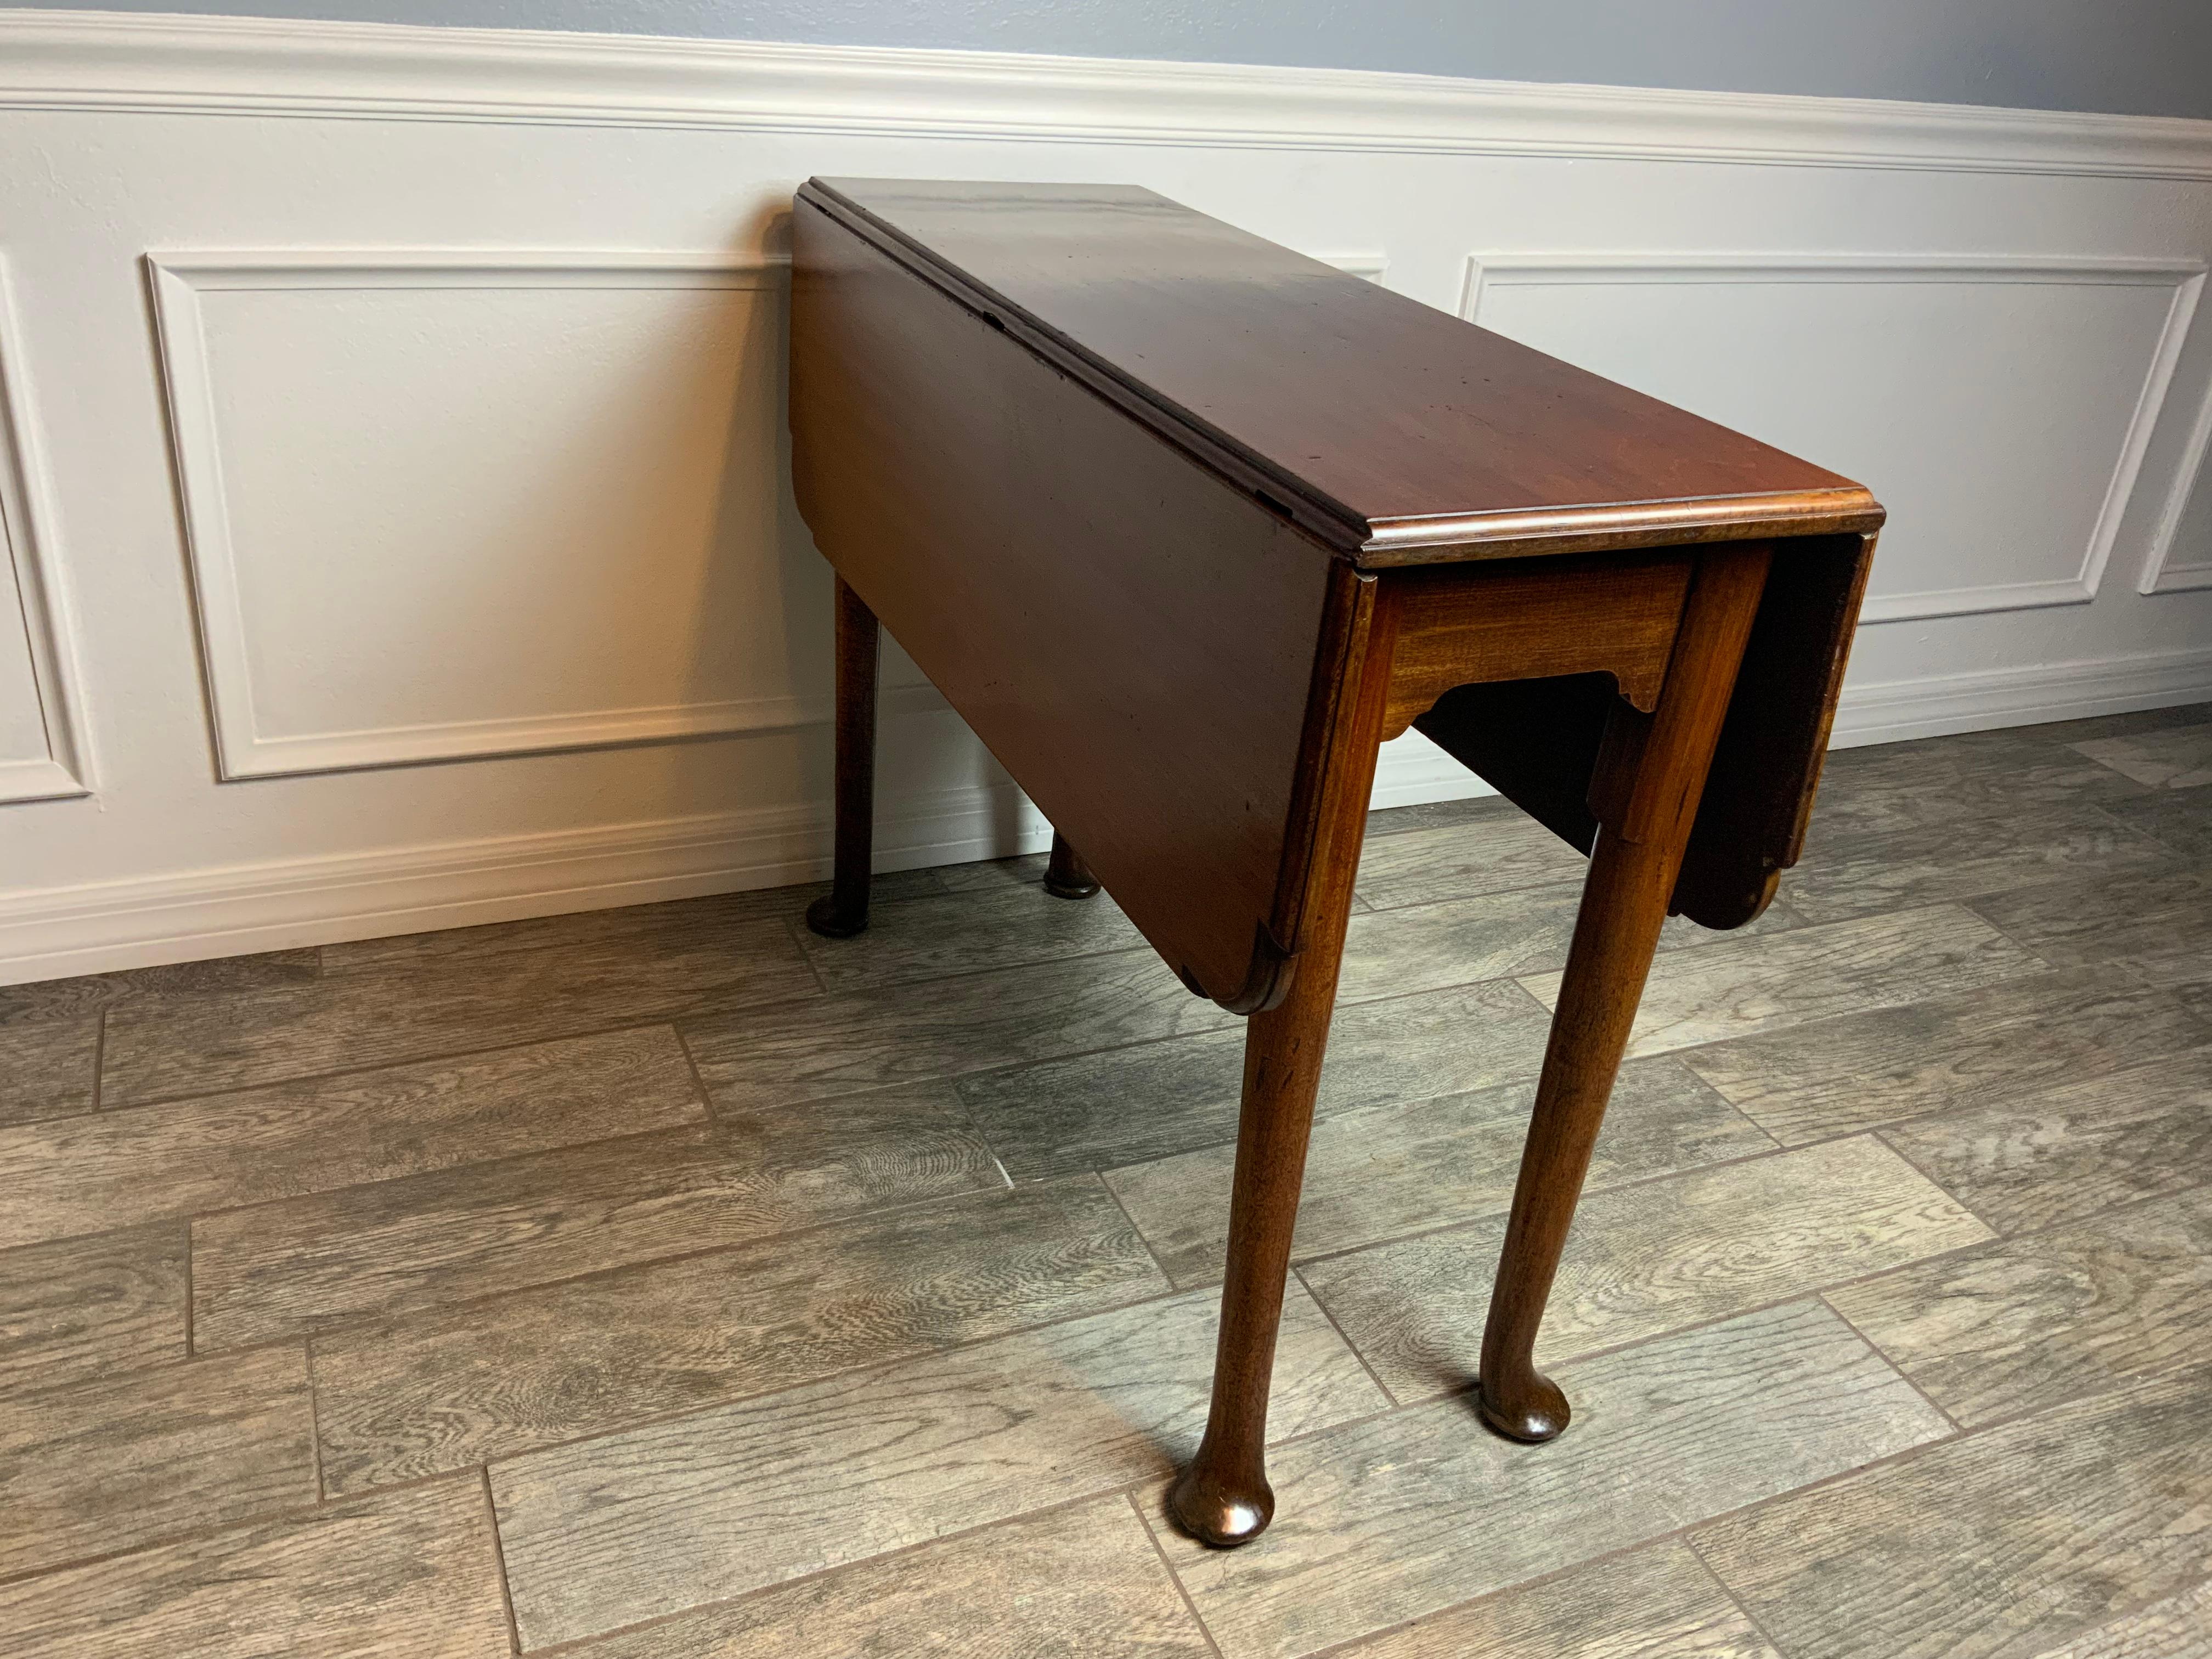 A very nice small size 18th Century Mahogany Queen Anne Pembroke table resting on tapered straight legs ending in nice wide pad feet.  Most of these Queen Anne drop leaf tables commonly seen are oval or round in shape.   This one has rectangular